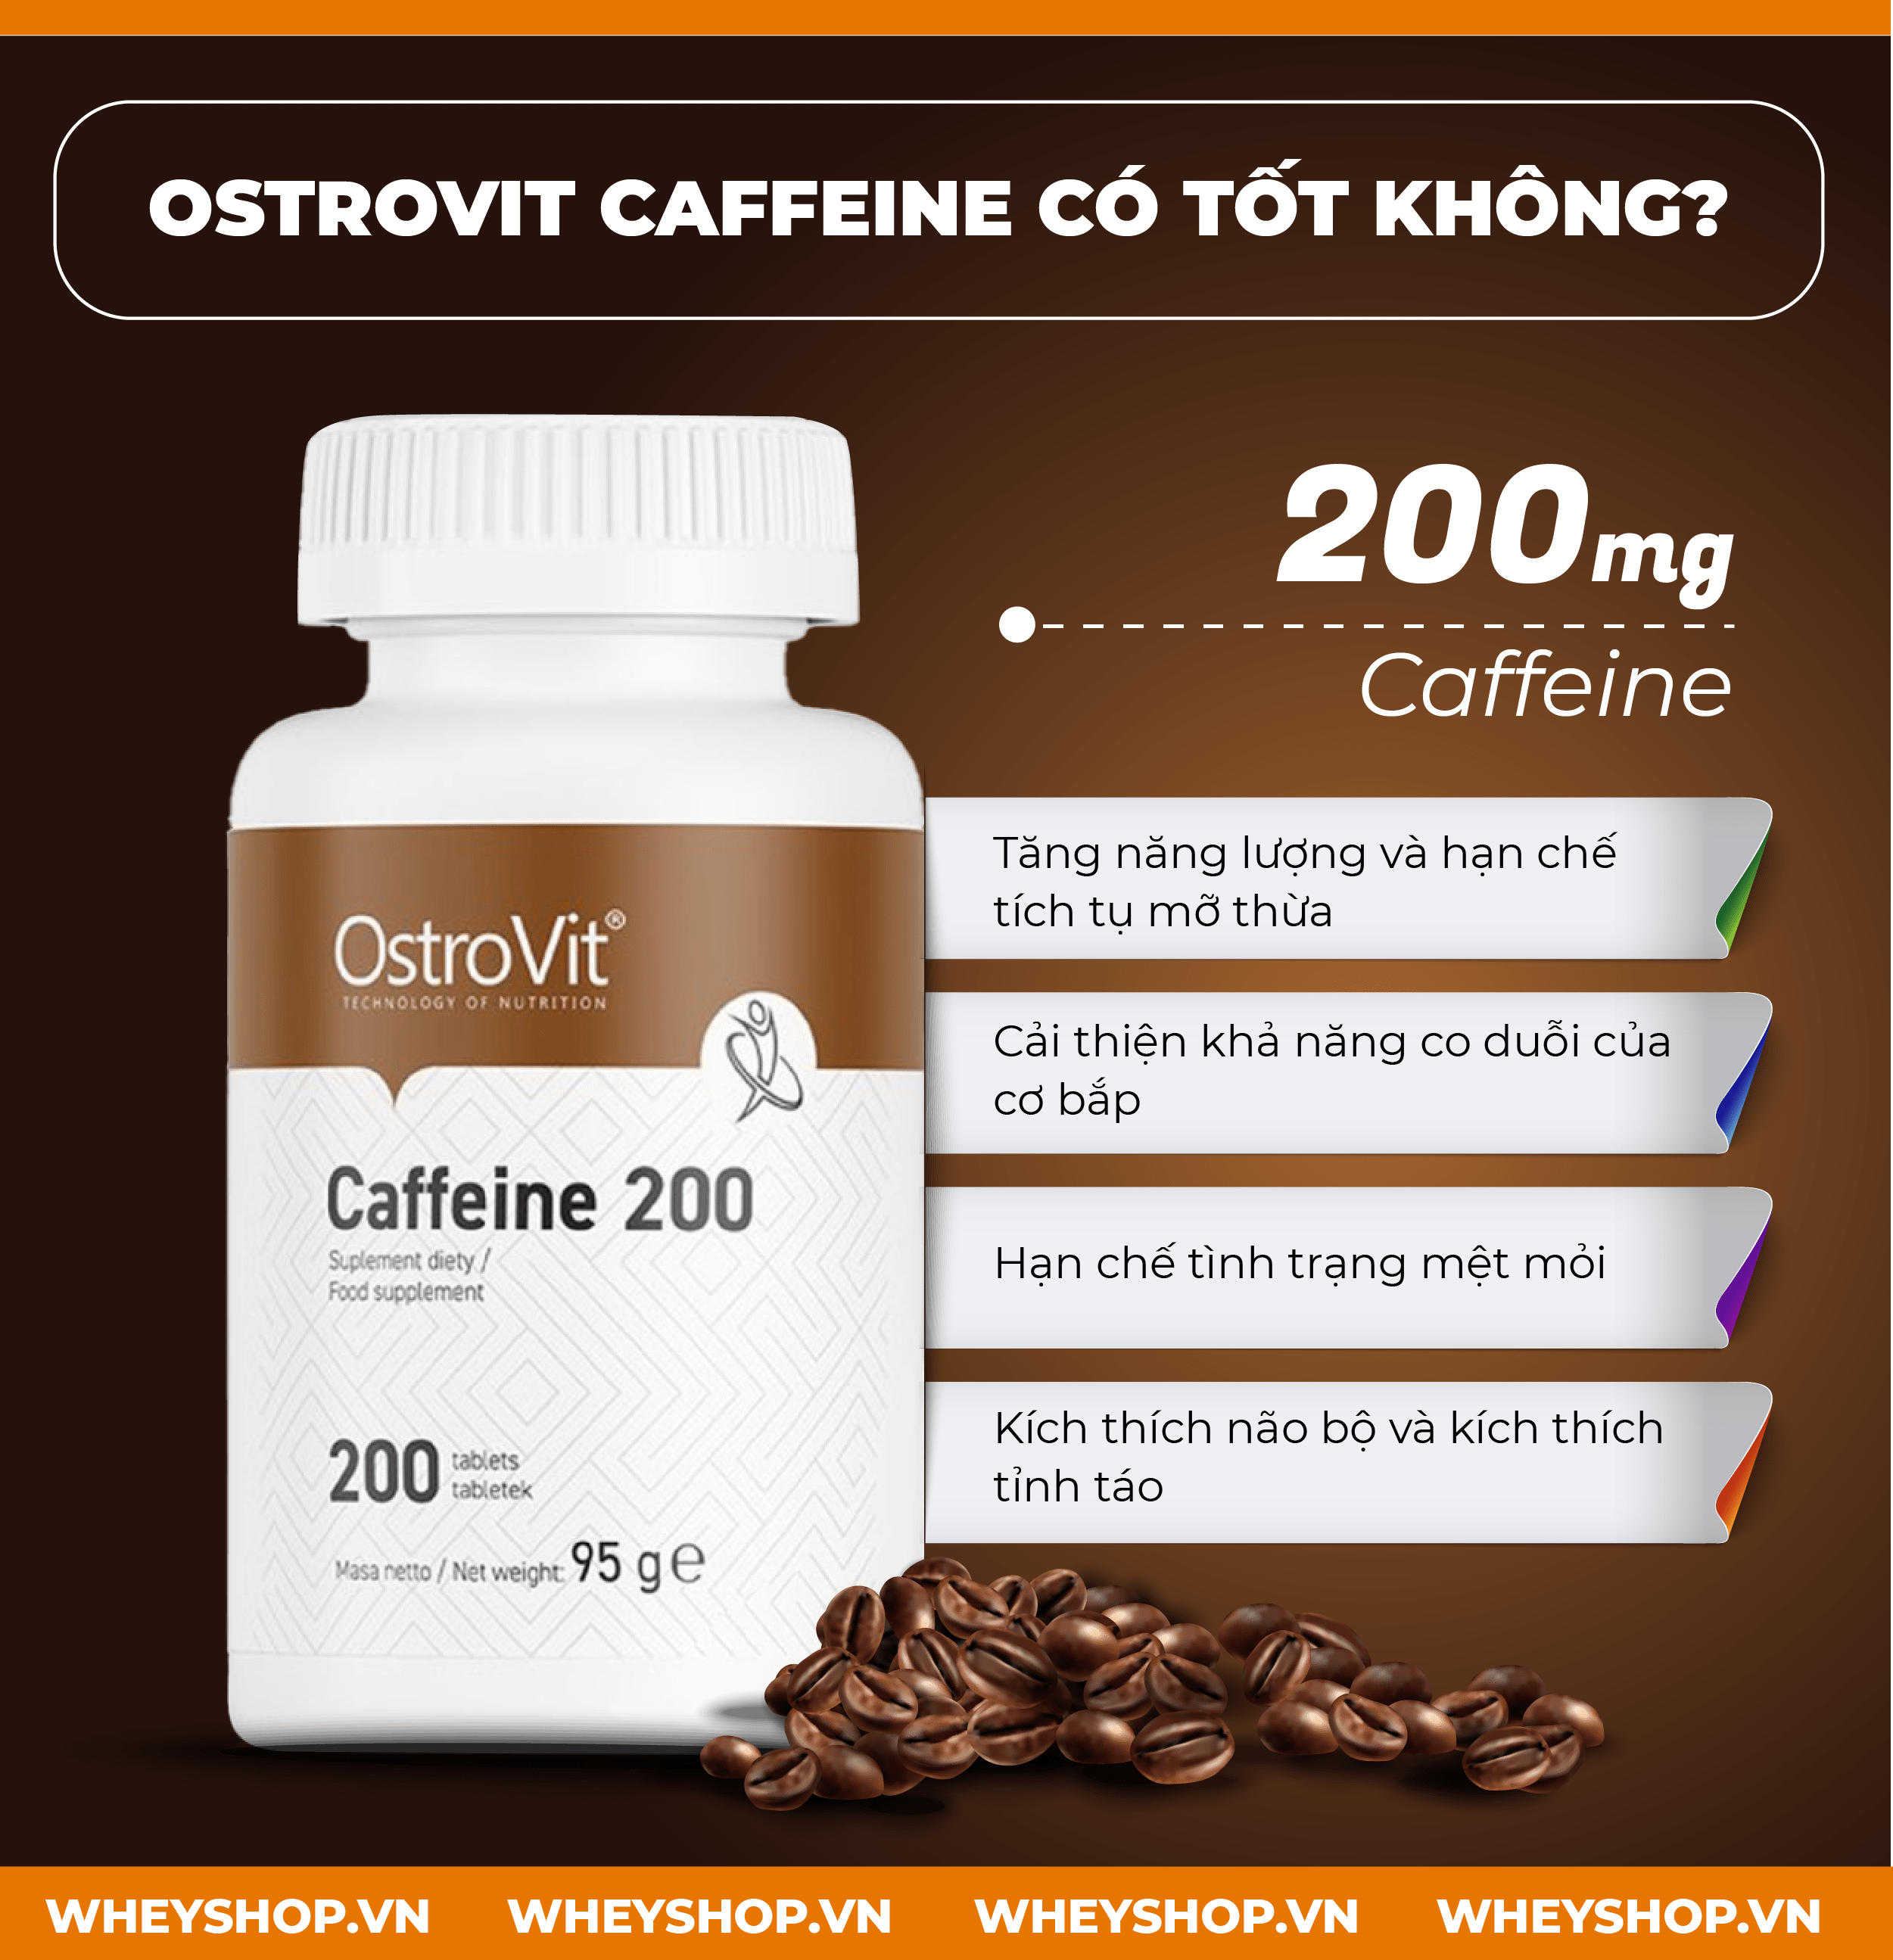 Review Ostrovit Caffeine Yes How much is it?></p>
<p>Ostrovit Caffeine is a caffeine-rich supplement to stimulate energy and strength to increase exercise performance, especially suitable for athletes, bodybuilders, people who need energy stimulation.Instantly increase mental and physical strength.</p>
<p>Caffeine works by stimulating the central nervous system, increasing the ability tog focus and improve mood.Furthermore, caffeine increases the heart rate, increases contractility, and increases metabolic rate.Caffeine has stimulant properties by acting on the cerebral cortex.It reduces fatigue and prolongs concentration time and improves concentration.</p>
<p>In 1 capsule of Ostrovit Caffeine contains 200mg of Supportive Caffeine: </p>
<ul>
<li>Stimulating to increase metabolic rate up to 11% and burn fat up to 13%, helping to increase energy and limit the accumulation of excess fat in the body.</li>
<li>Improve muscle contraction, increase strengthbody tolerance.</li>
<li>Blocking the effects of adesnosine-a neurotransmitter that helps relax the brain and limit fatigue.</li>
<li>Stimulates the brain and stimulates alertness, and concentration.</li>
</ul>
<p>(*) NOTE: Although Ostrovit Caffeine supplements have many benefits, too much caffeine during the day can cause some significant side effects such as:</p>
<ul>
<li>Dizziness, fatigue</li>
<li>Nausea</li>
<li>Urinating a lot</li>
</ul>
<h2><b>2.Instructions for using Ostrovit Caffeine effectively</b></h2>
<p>Use 1.per dayOstrovit Caffeine tablets at the right time to need alertness and concentration such as:</p>
<ul>
<li>15 minutes before training</li>
<li>Or whenever the body is tired from working</li>
</ul>
<p><strong>Note when using Ostrovit Caffeine:</strong></p>
<ul>
<li>Continuous daily use of caffeine will reduce the effectiveness of the product</li>
<li>It is recommended to use caffeine 6 hours away from sleep, to avoid affecting sleep.</li>
<li>Not intended for persons under 18 years of age.</li>
<li>This product is not a medicine and is not a substitute for medicine.</li>
</ul><h2><b><img src=